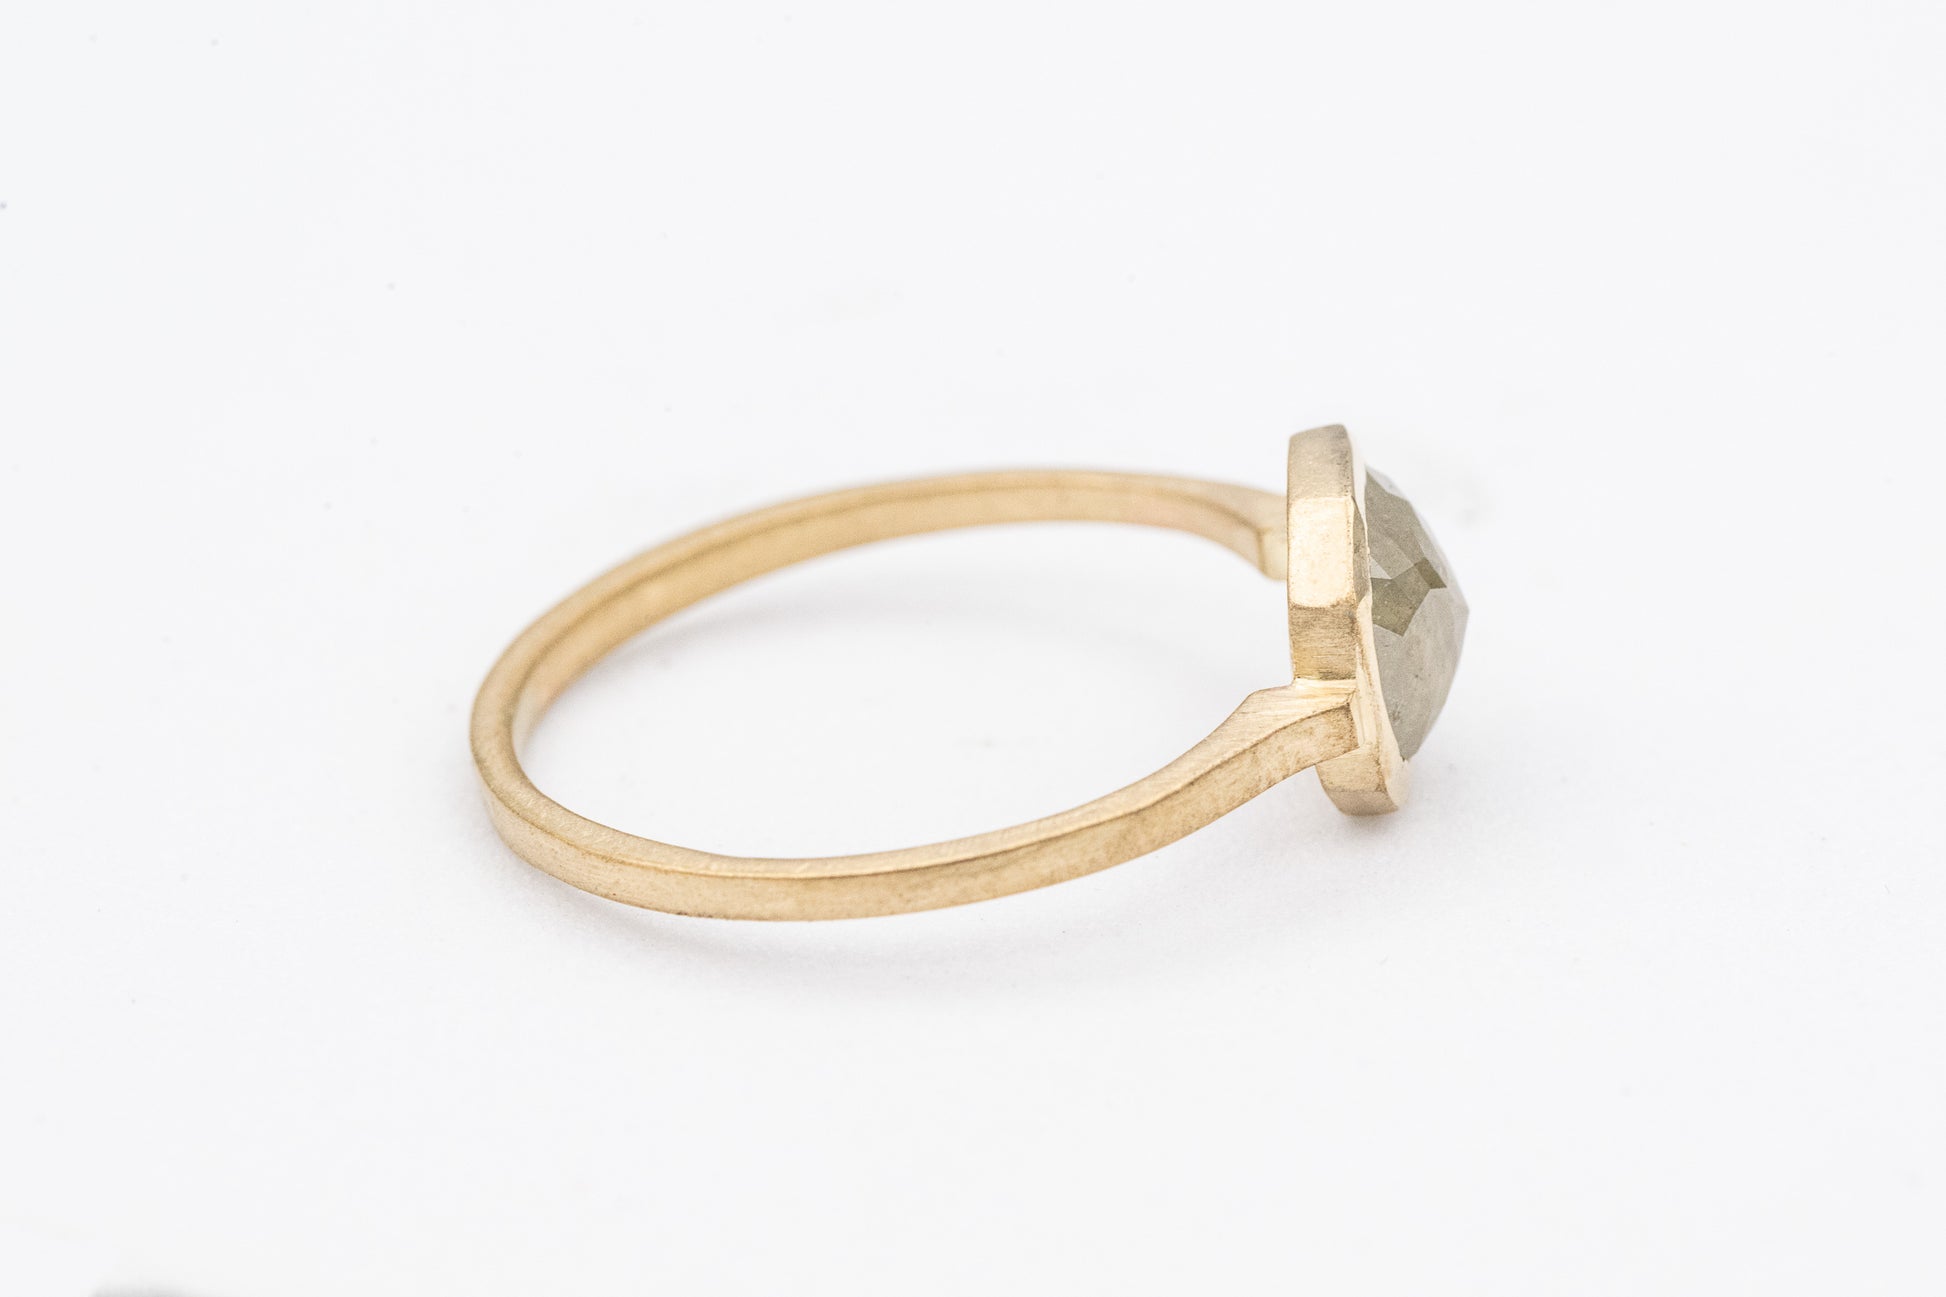 A handmade Gray Diamond Ring in 14k Yellow Gold from Cassin Jewelry.